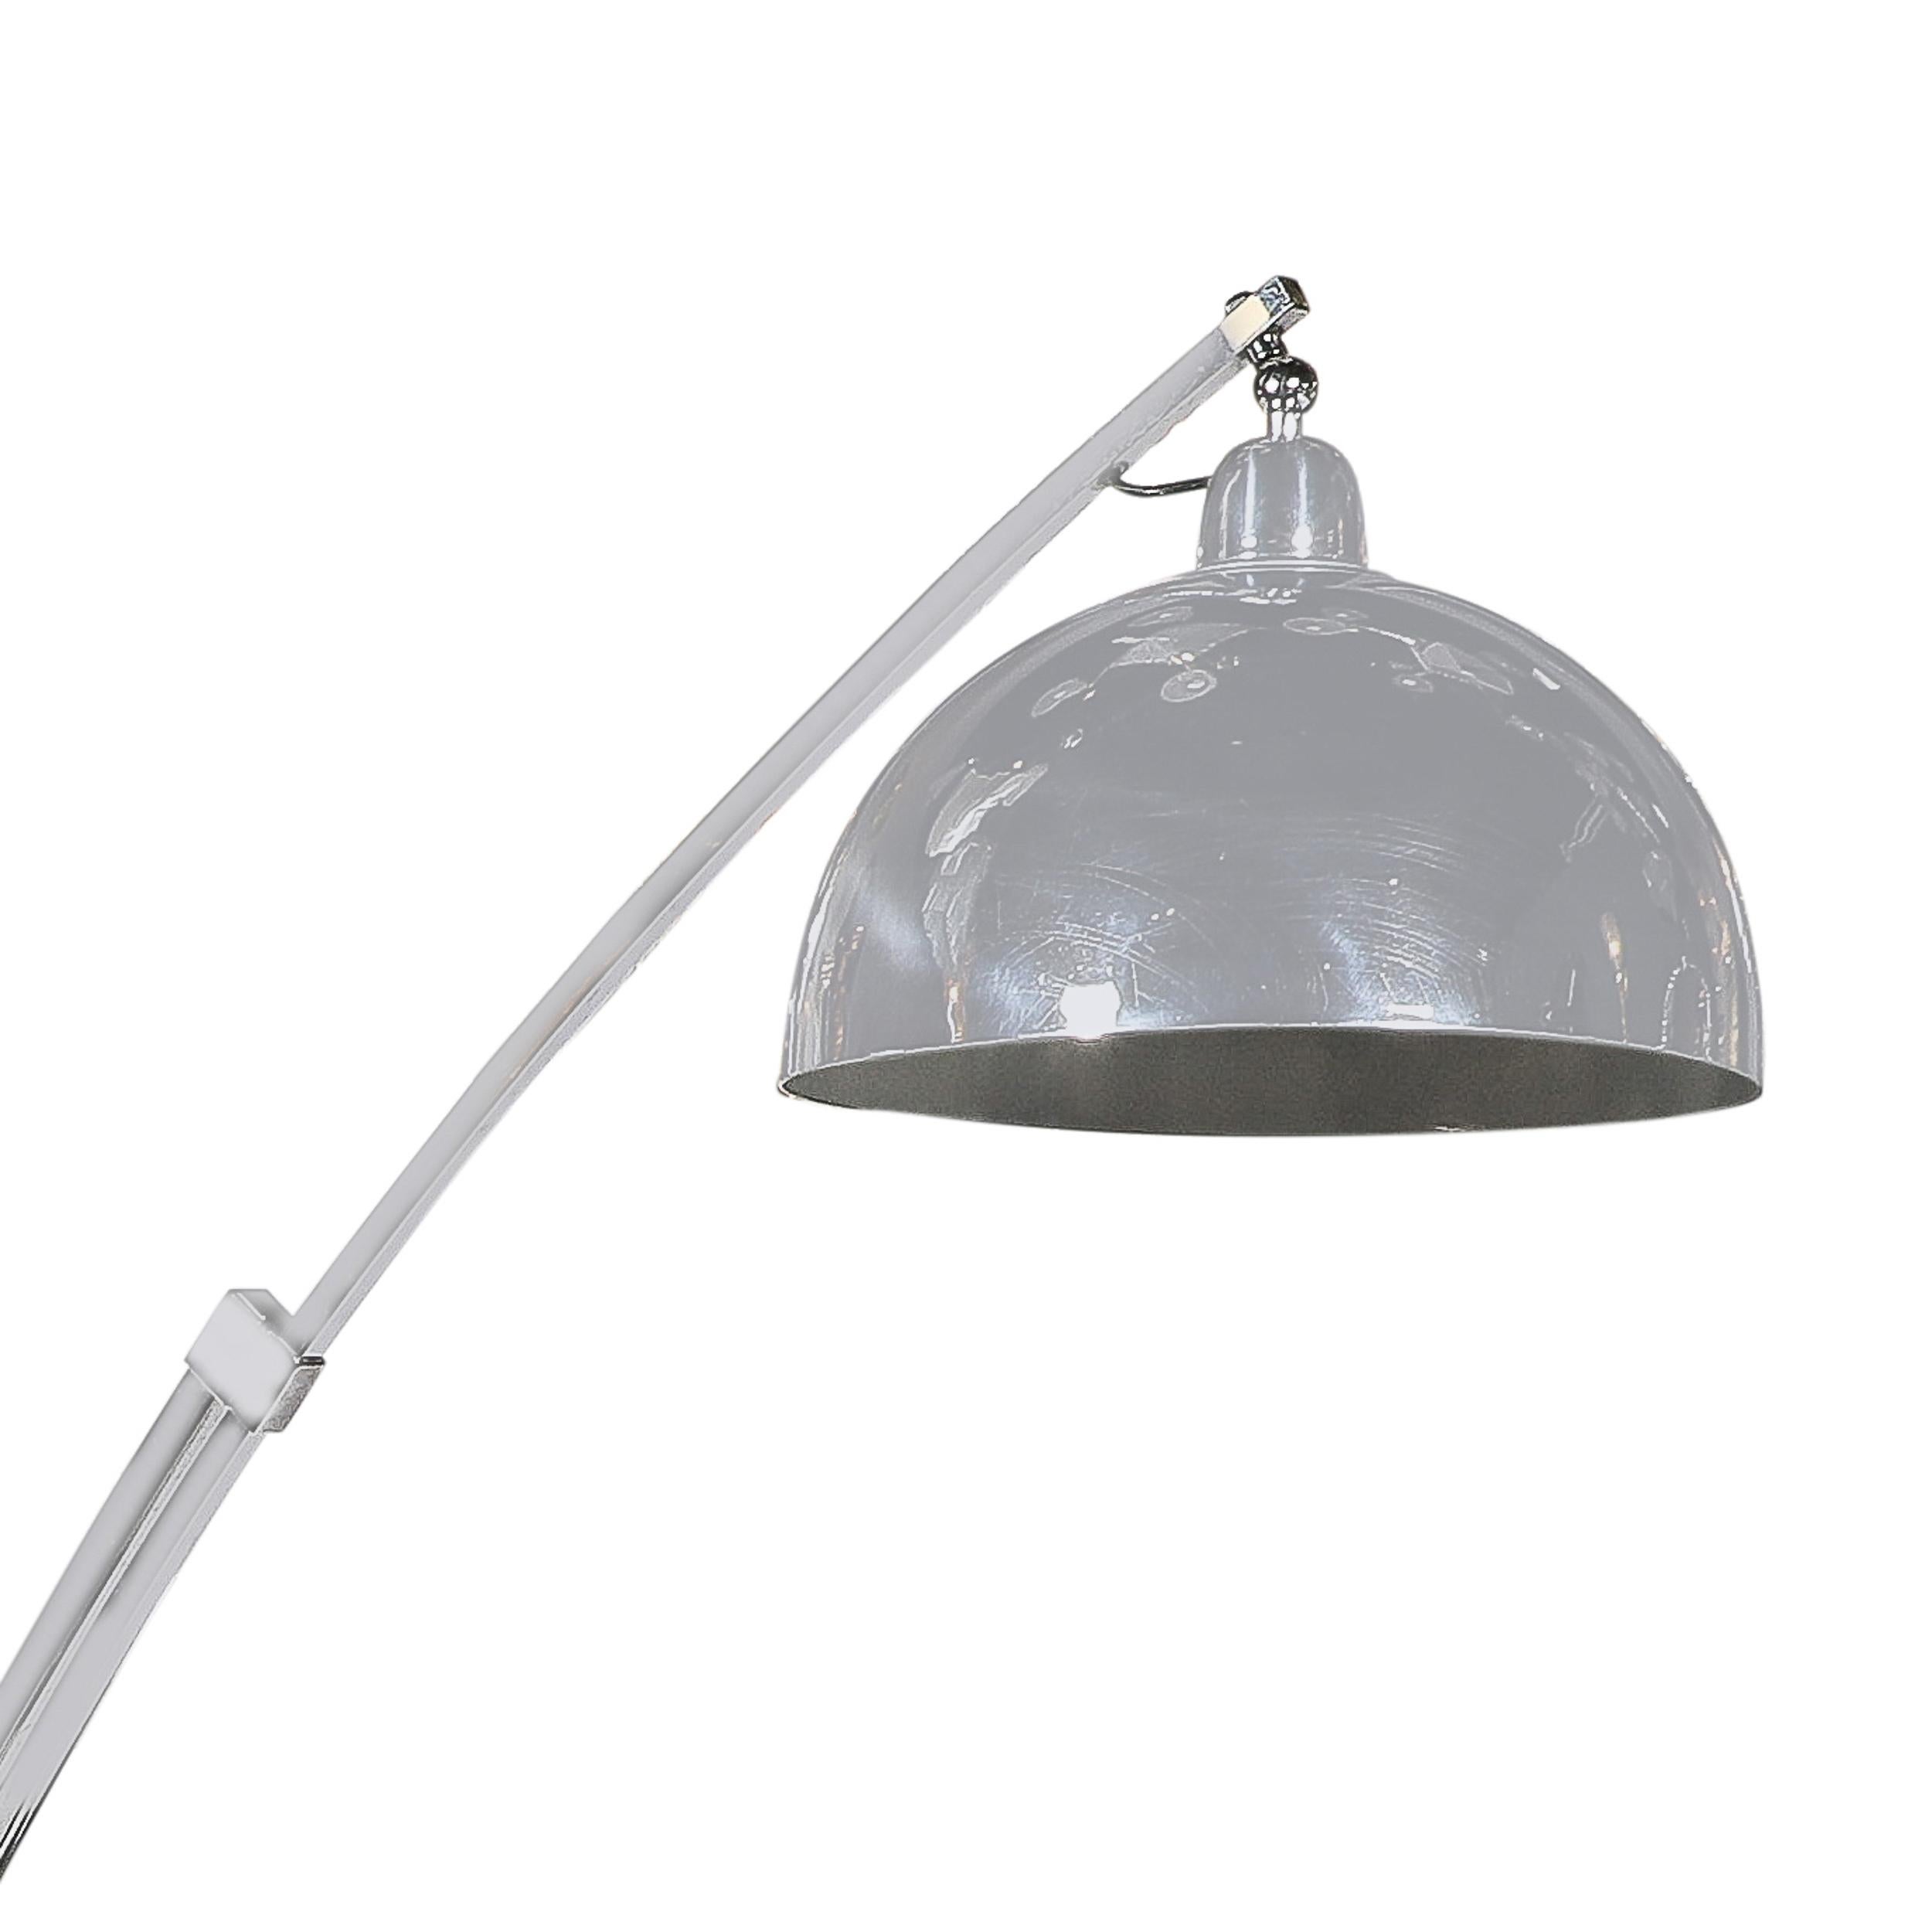 This well scaled and dynamic Mid-Century Modernist Extendable Arching Floor Lamp in Polished Chrome originates from the United States, Circa 1970. Features a large rounded shade in chrome that hangs from an arching and adjustable framework of